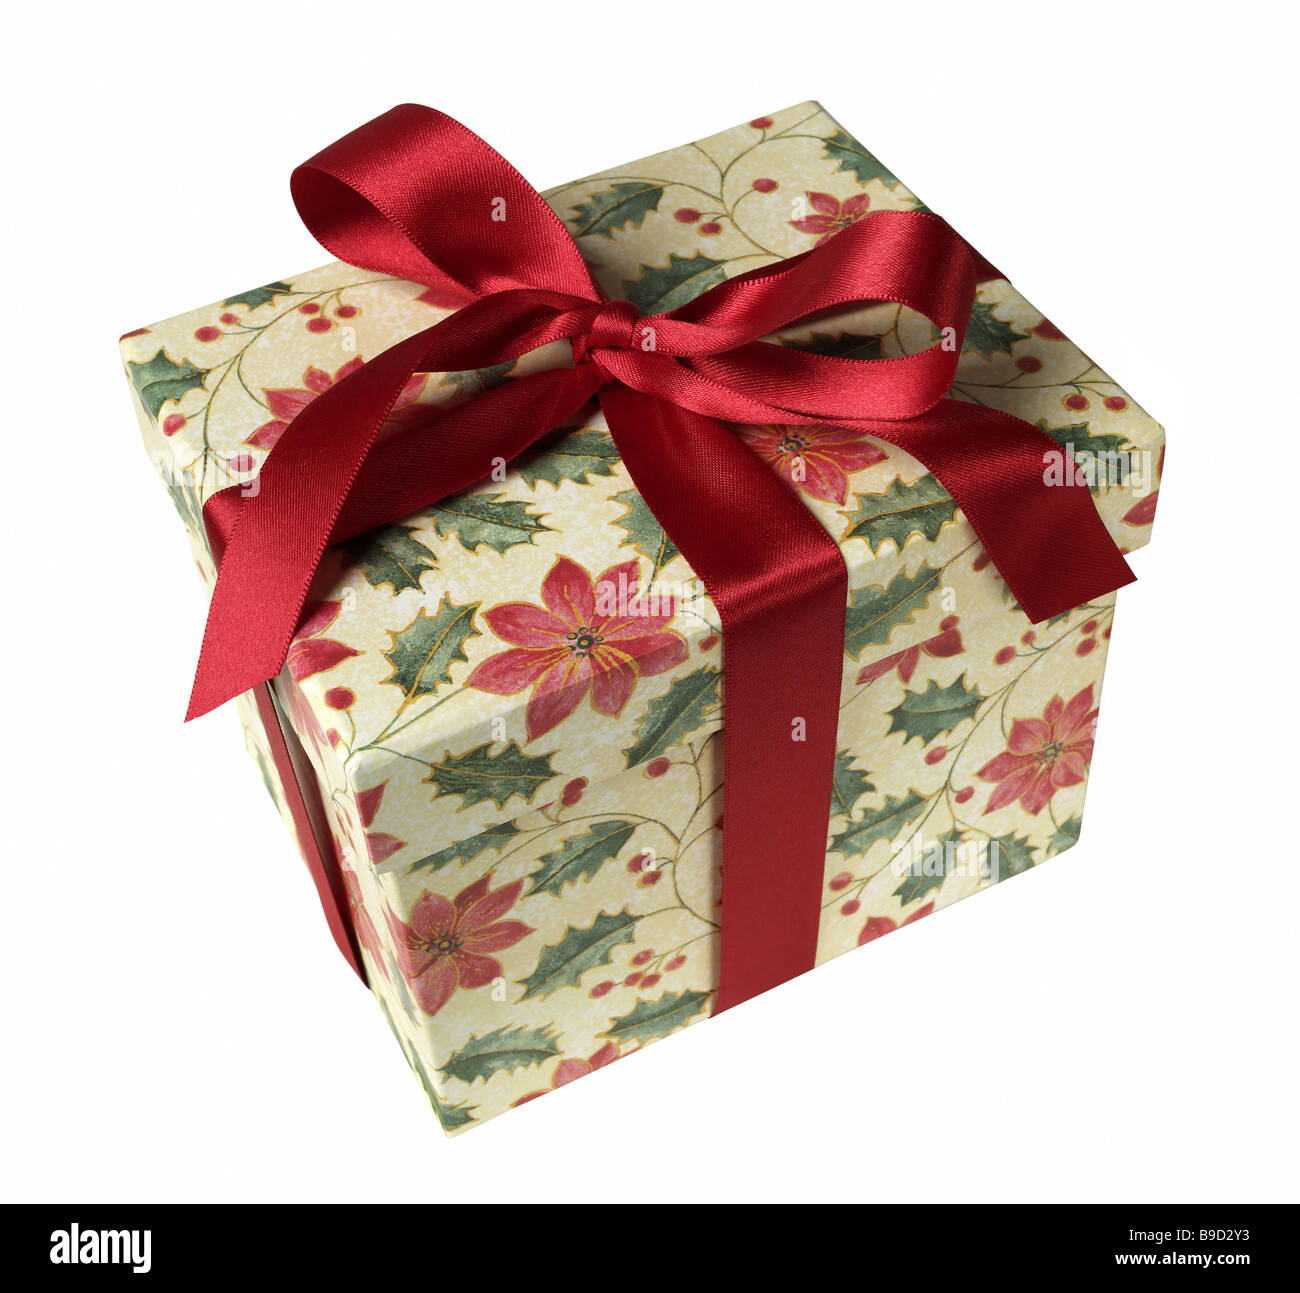 Gift Present Box with bow Stock Photo